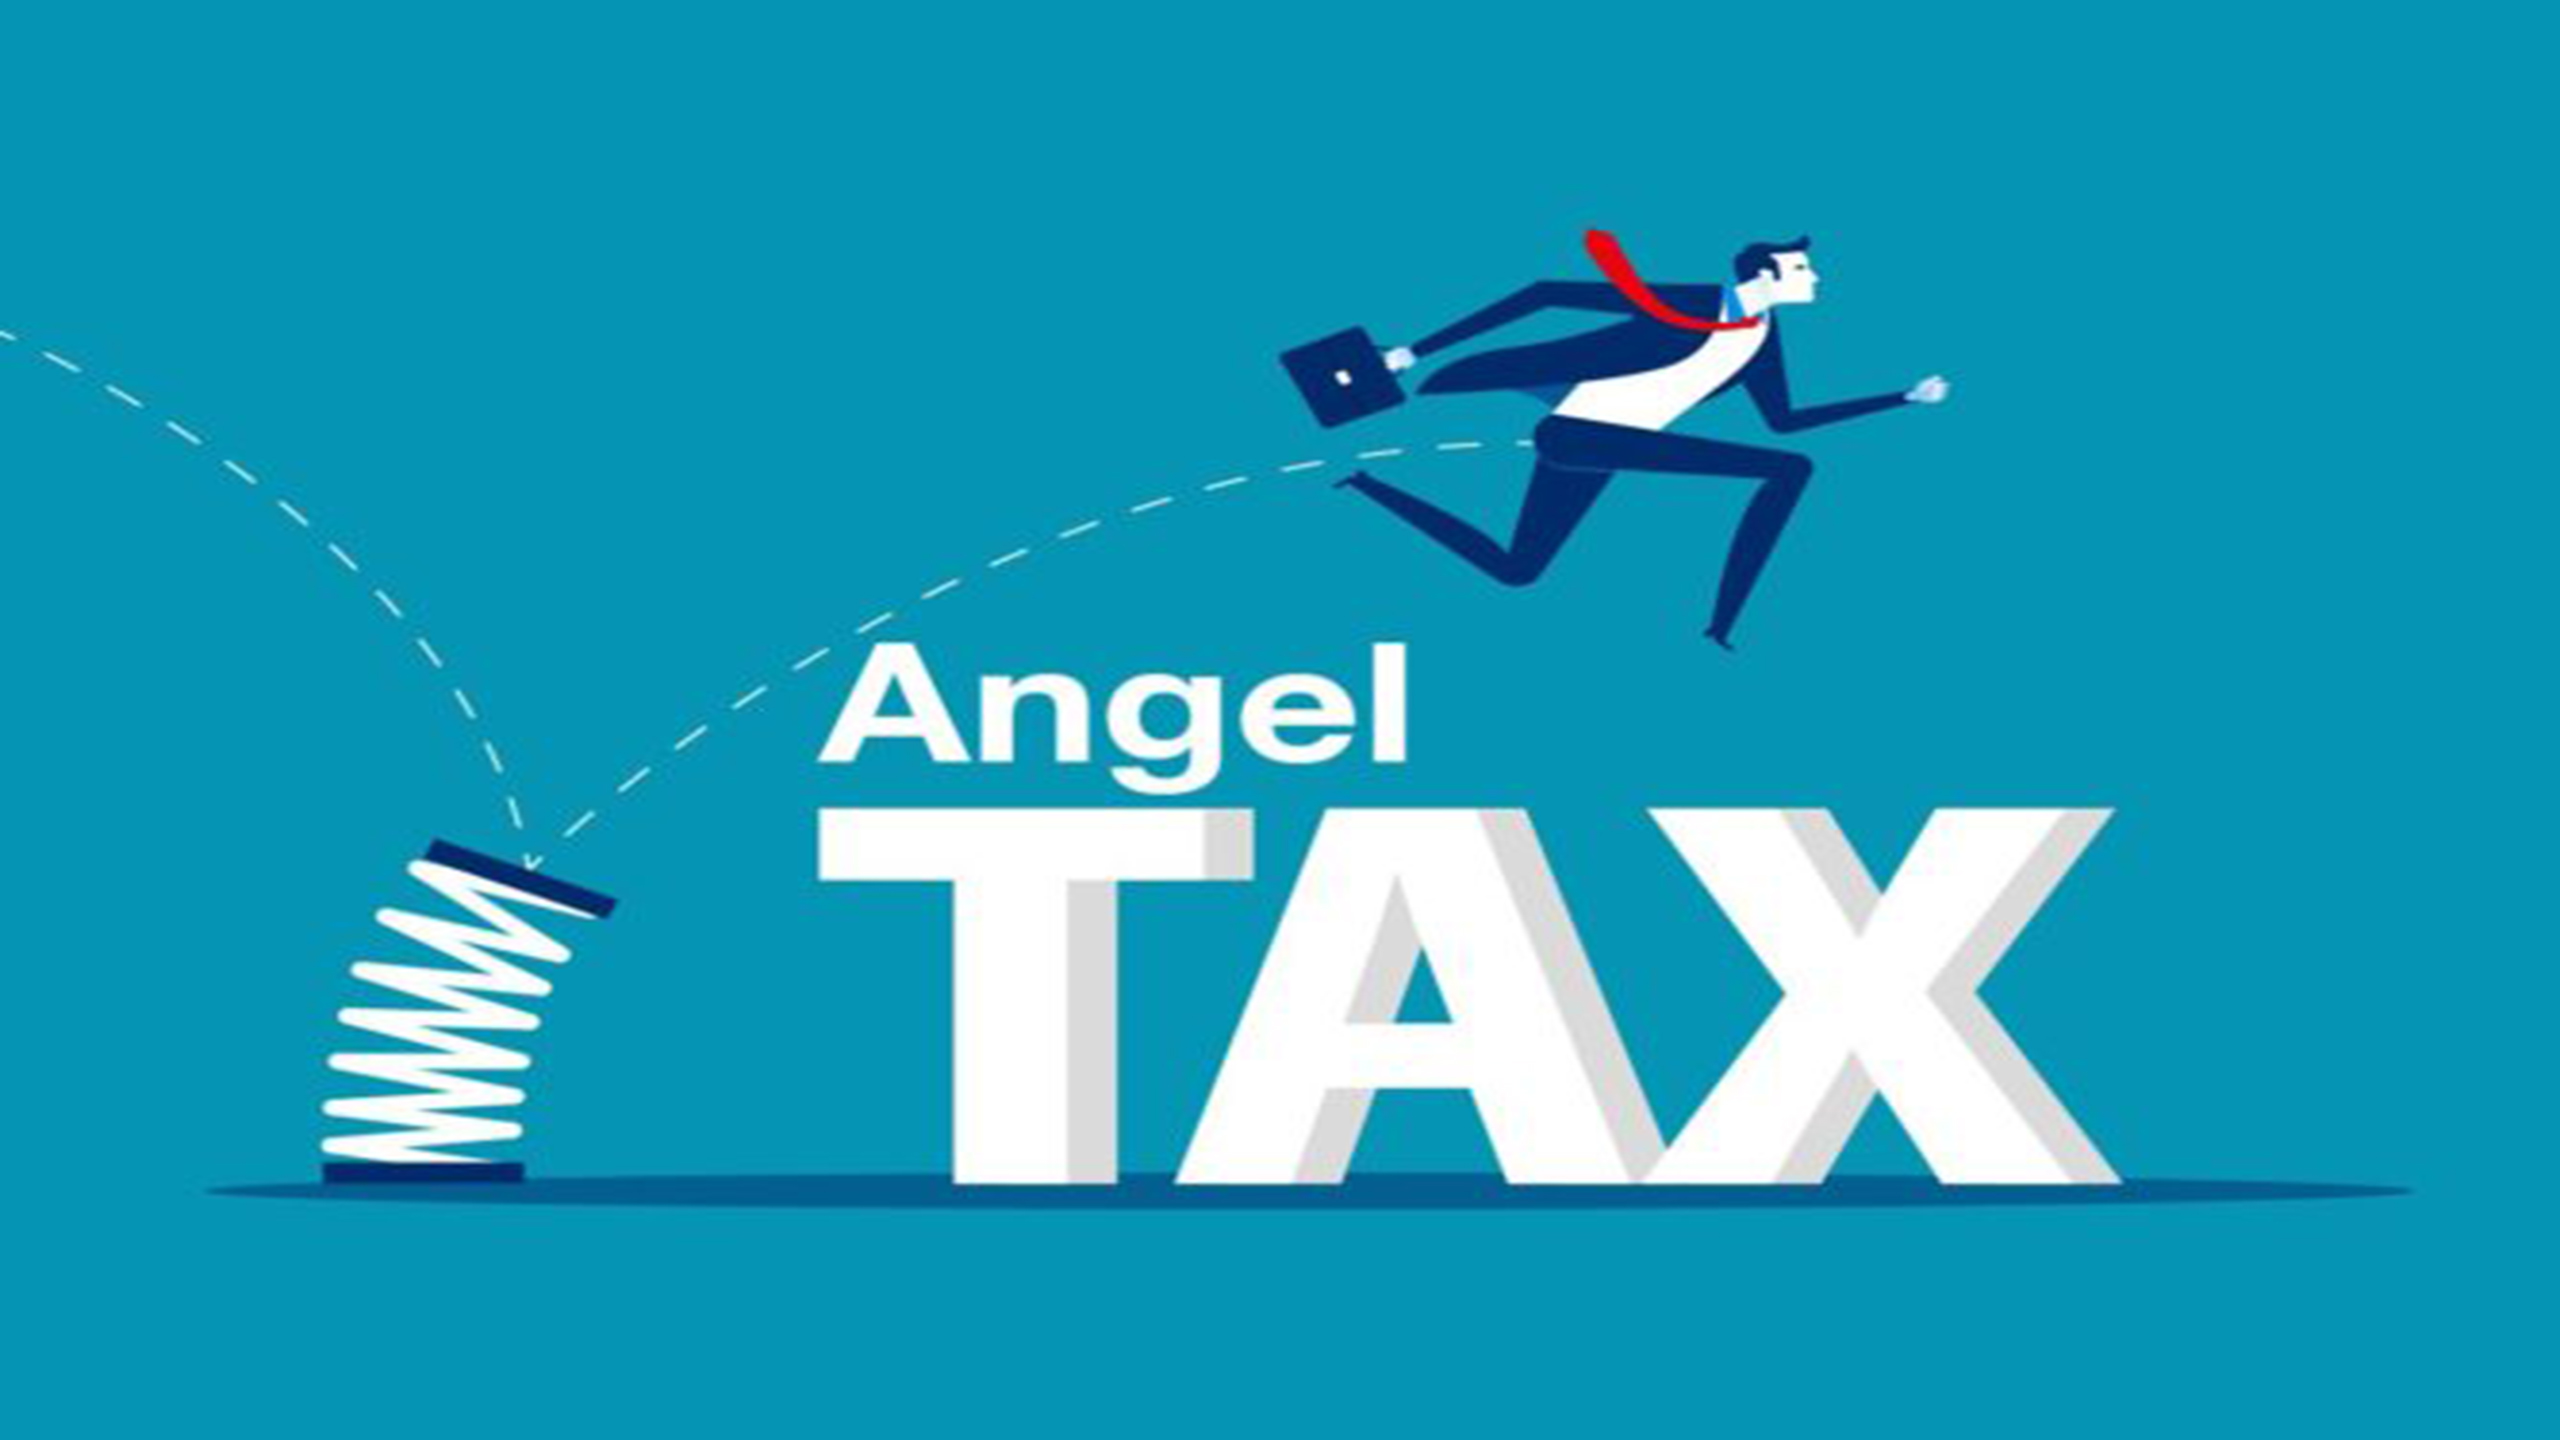 ANGEL TAX AND ITS IMPACT ON INDIAN STARTUP ECOSYSTEM